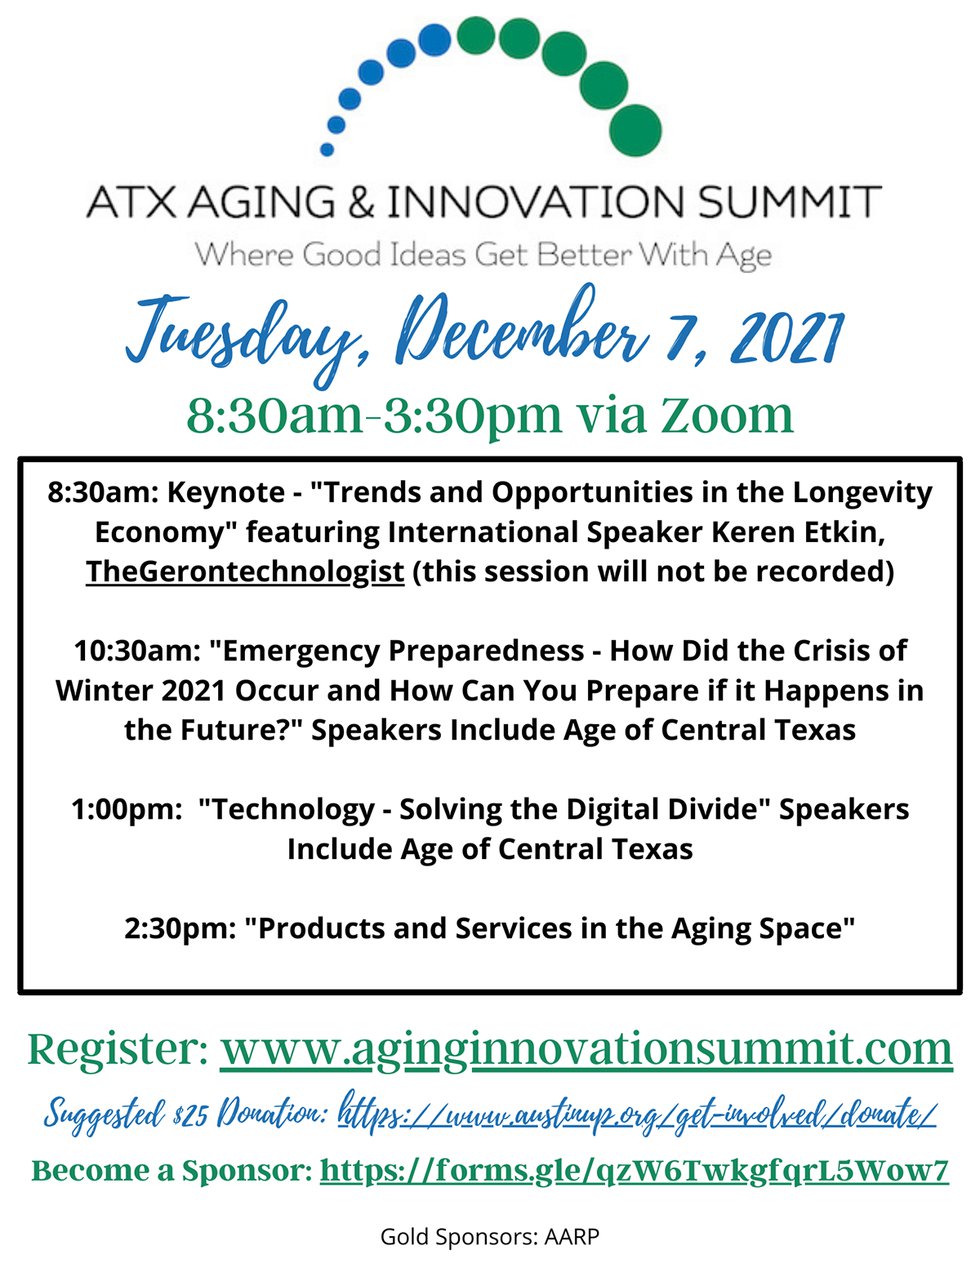 ATX Aging & Innovation Summit 2021.png